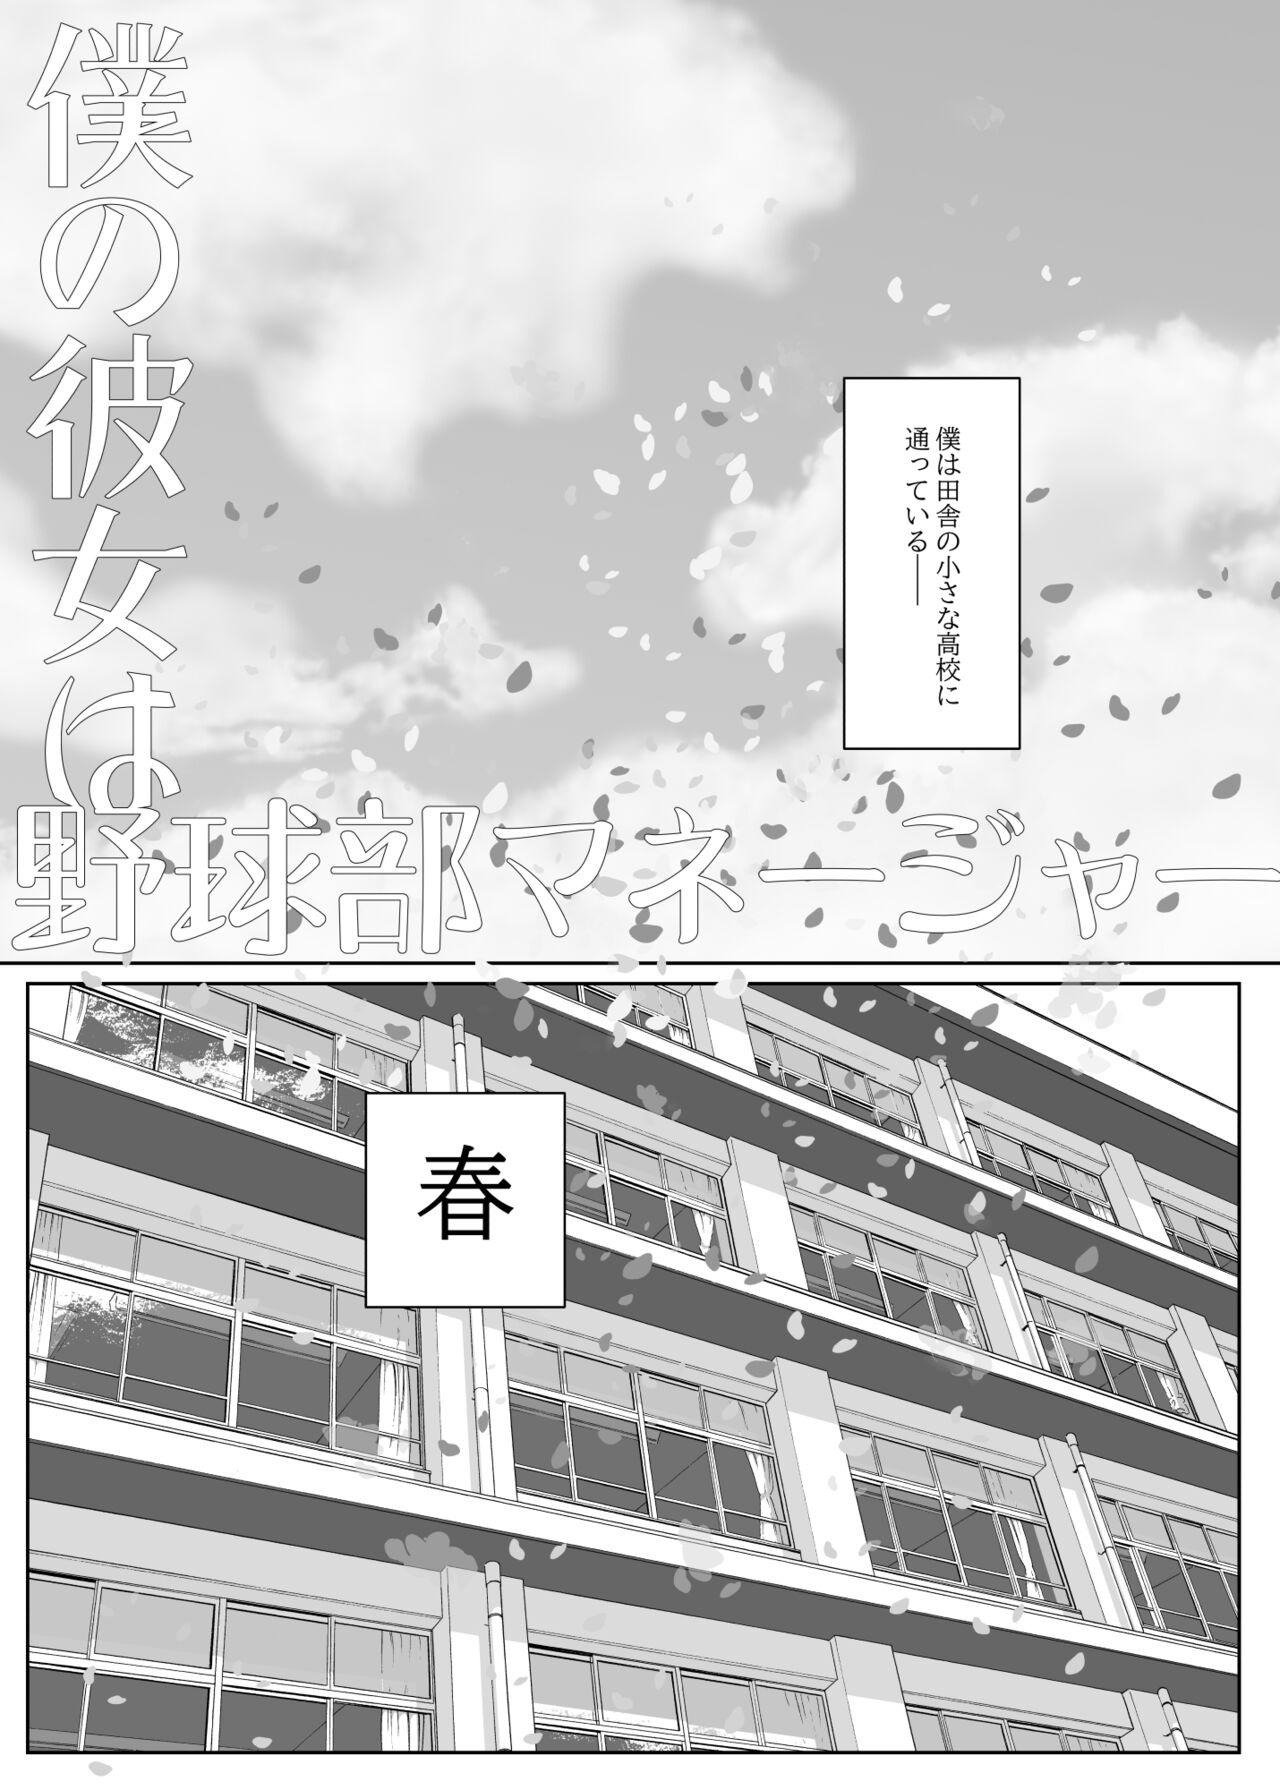 Chacal 僕の彼女は野球部マネージャーver.2.2 - Original Peluda - Page 5